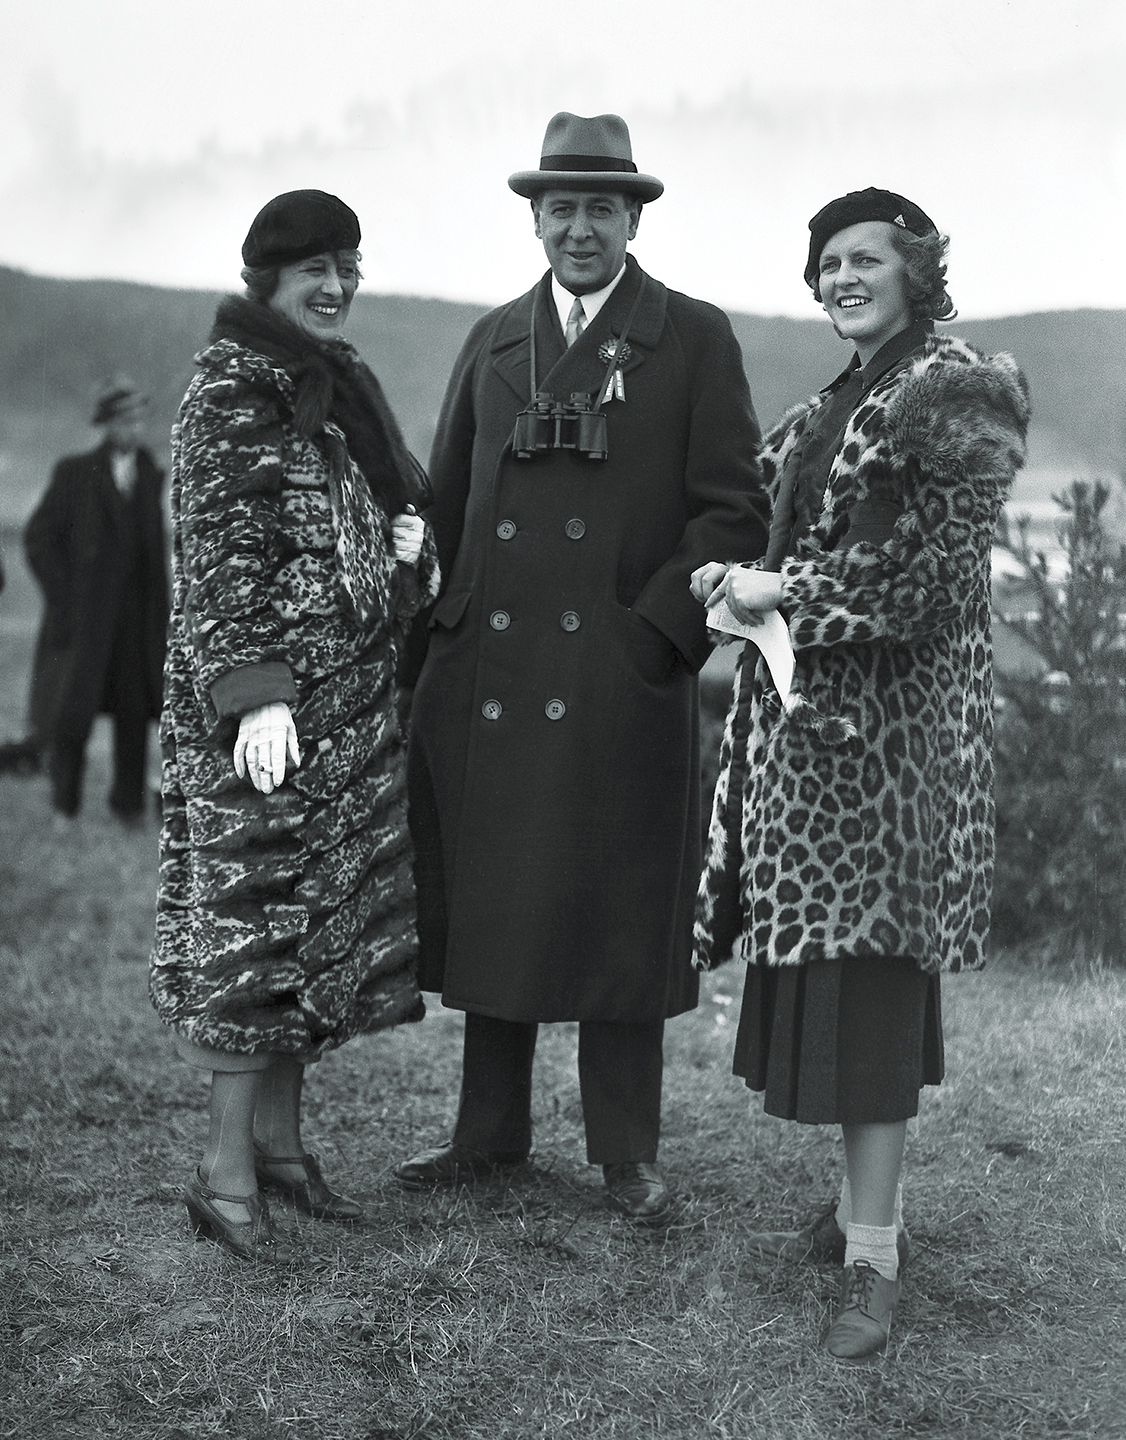 Photo of American financier and president of the New York Stock Exchange Richard Whitney poses with his wife Gertrude (nee Sheldon Sands) and his daughter Nancy at an unidentified event, 1934.